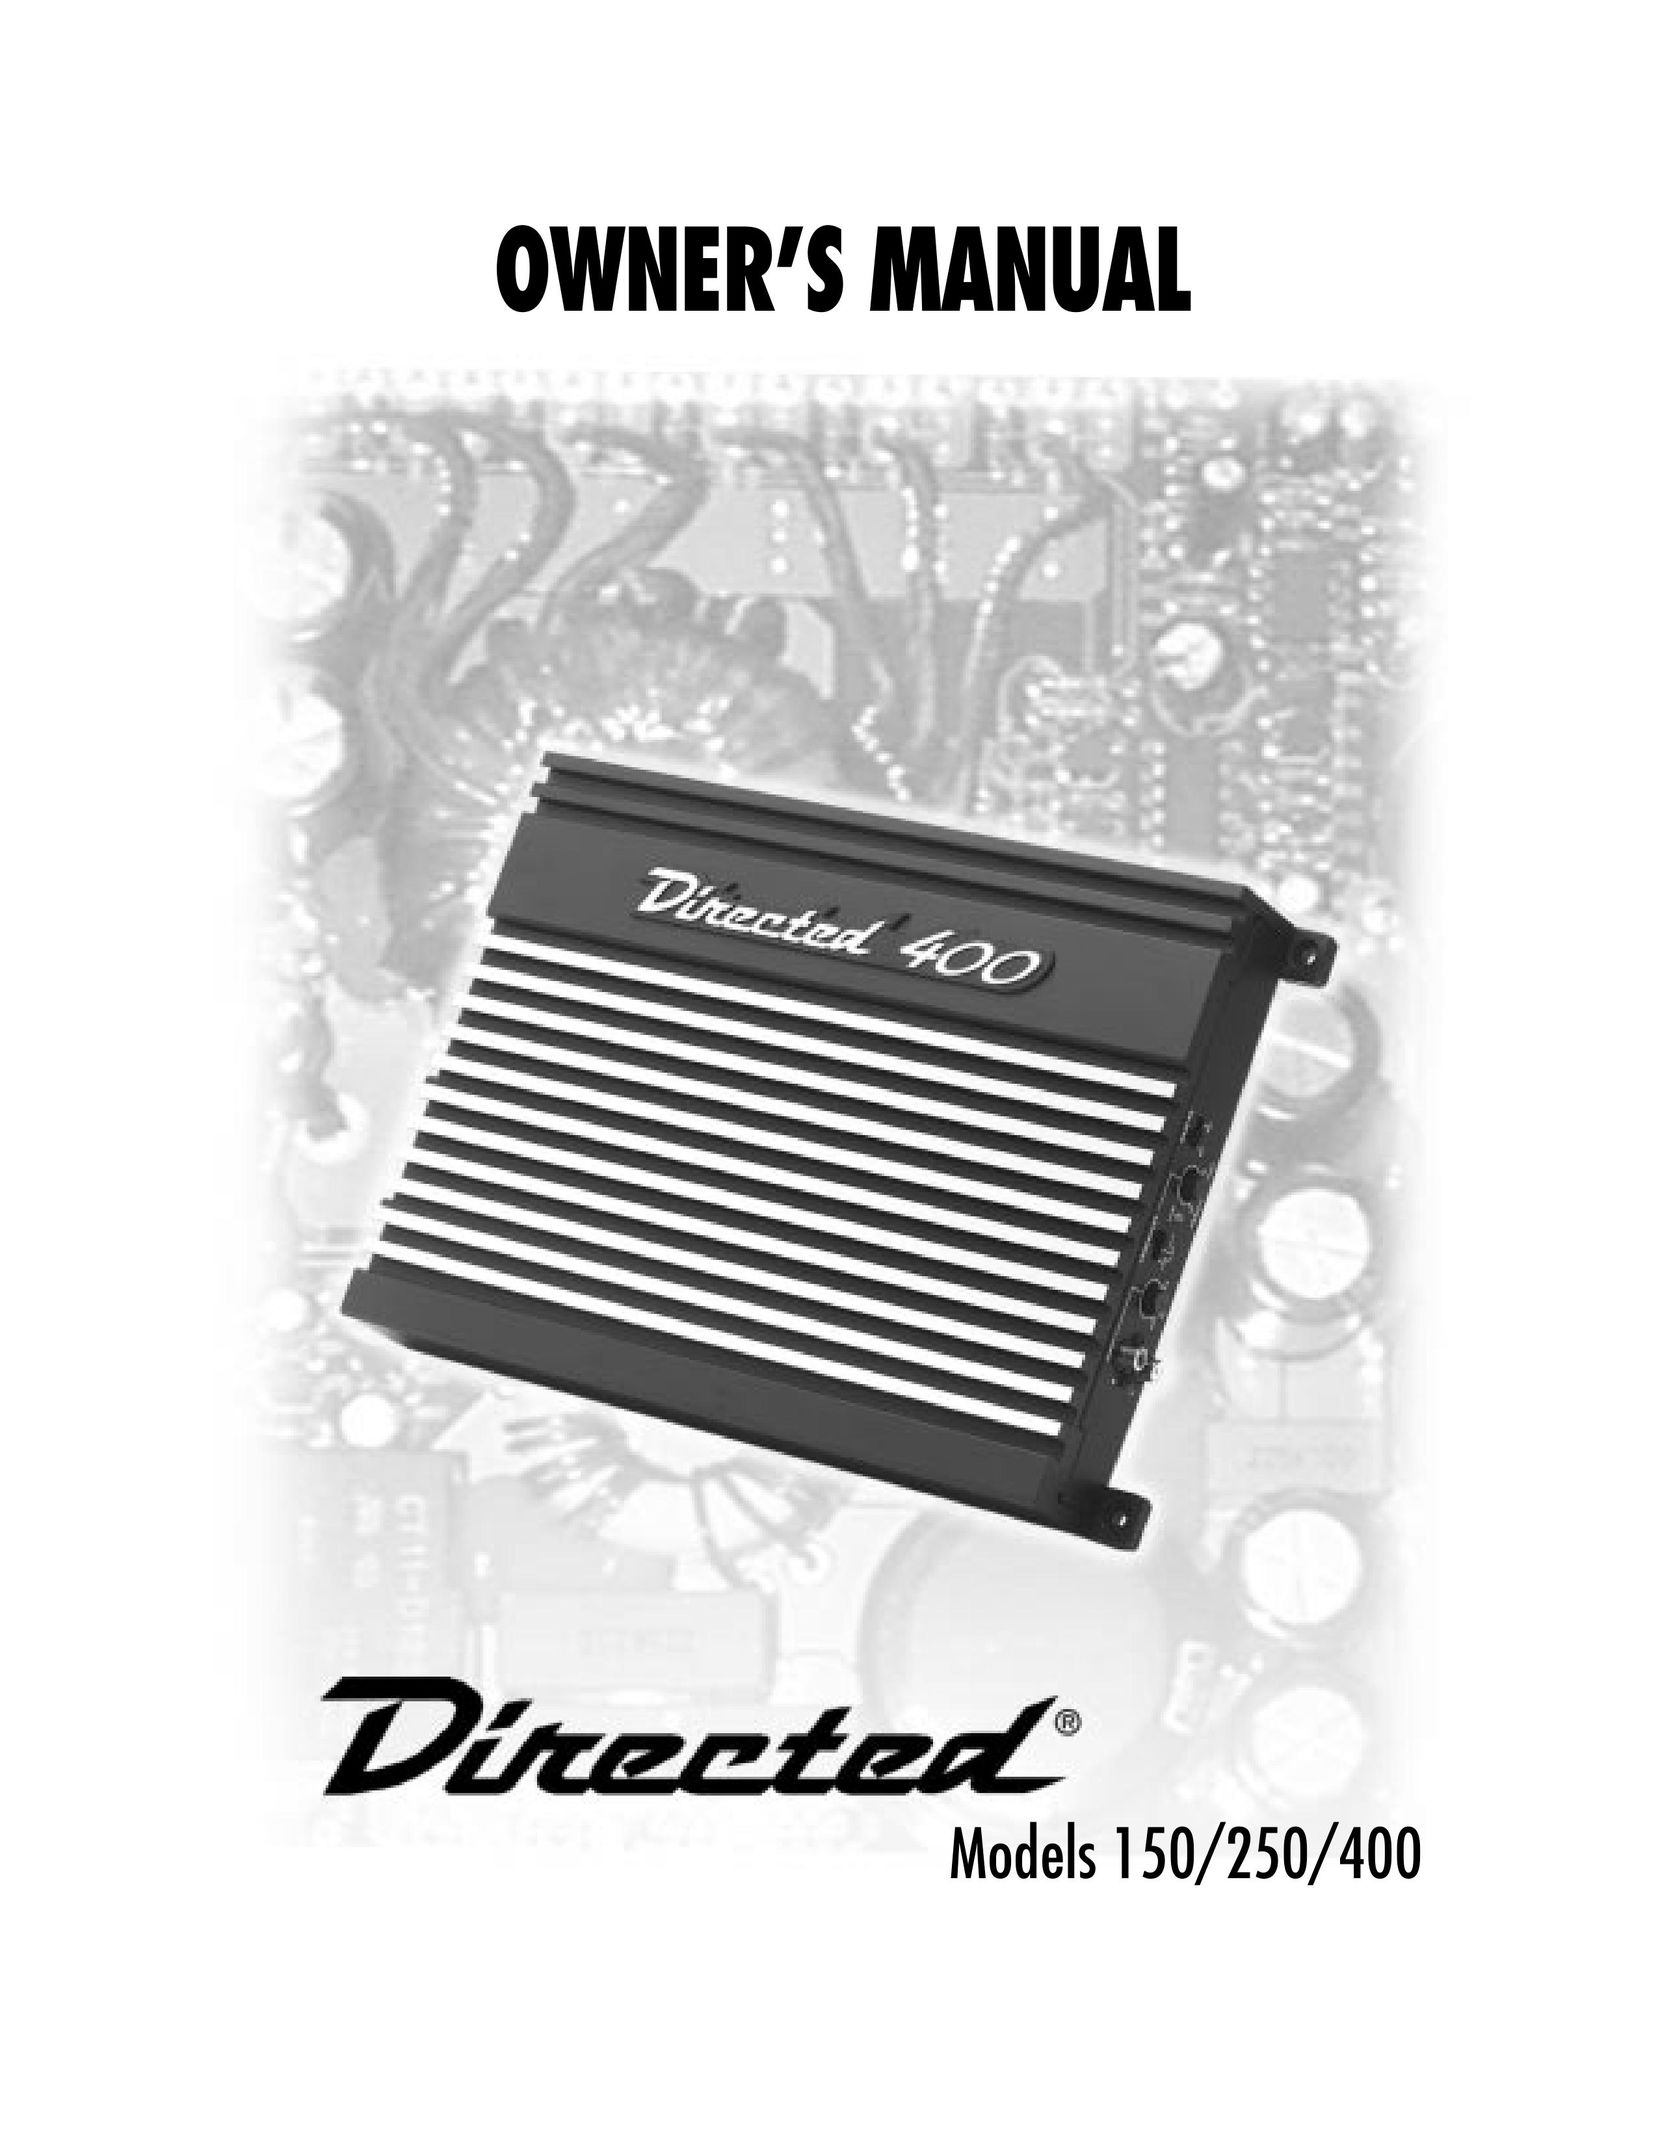 Directed Electronics 400 Car Amplifier User Manual (Page 1)